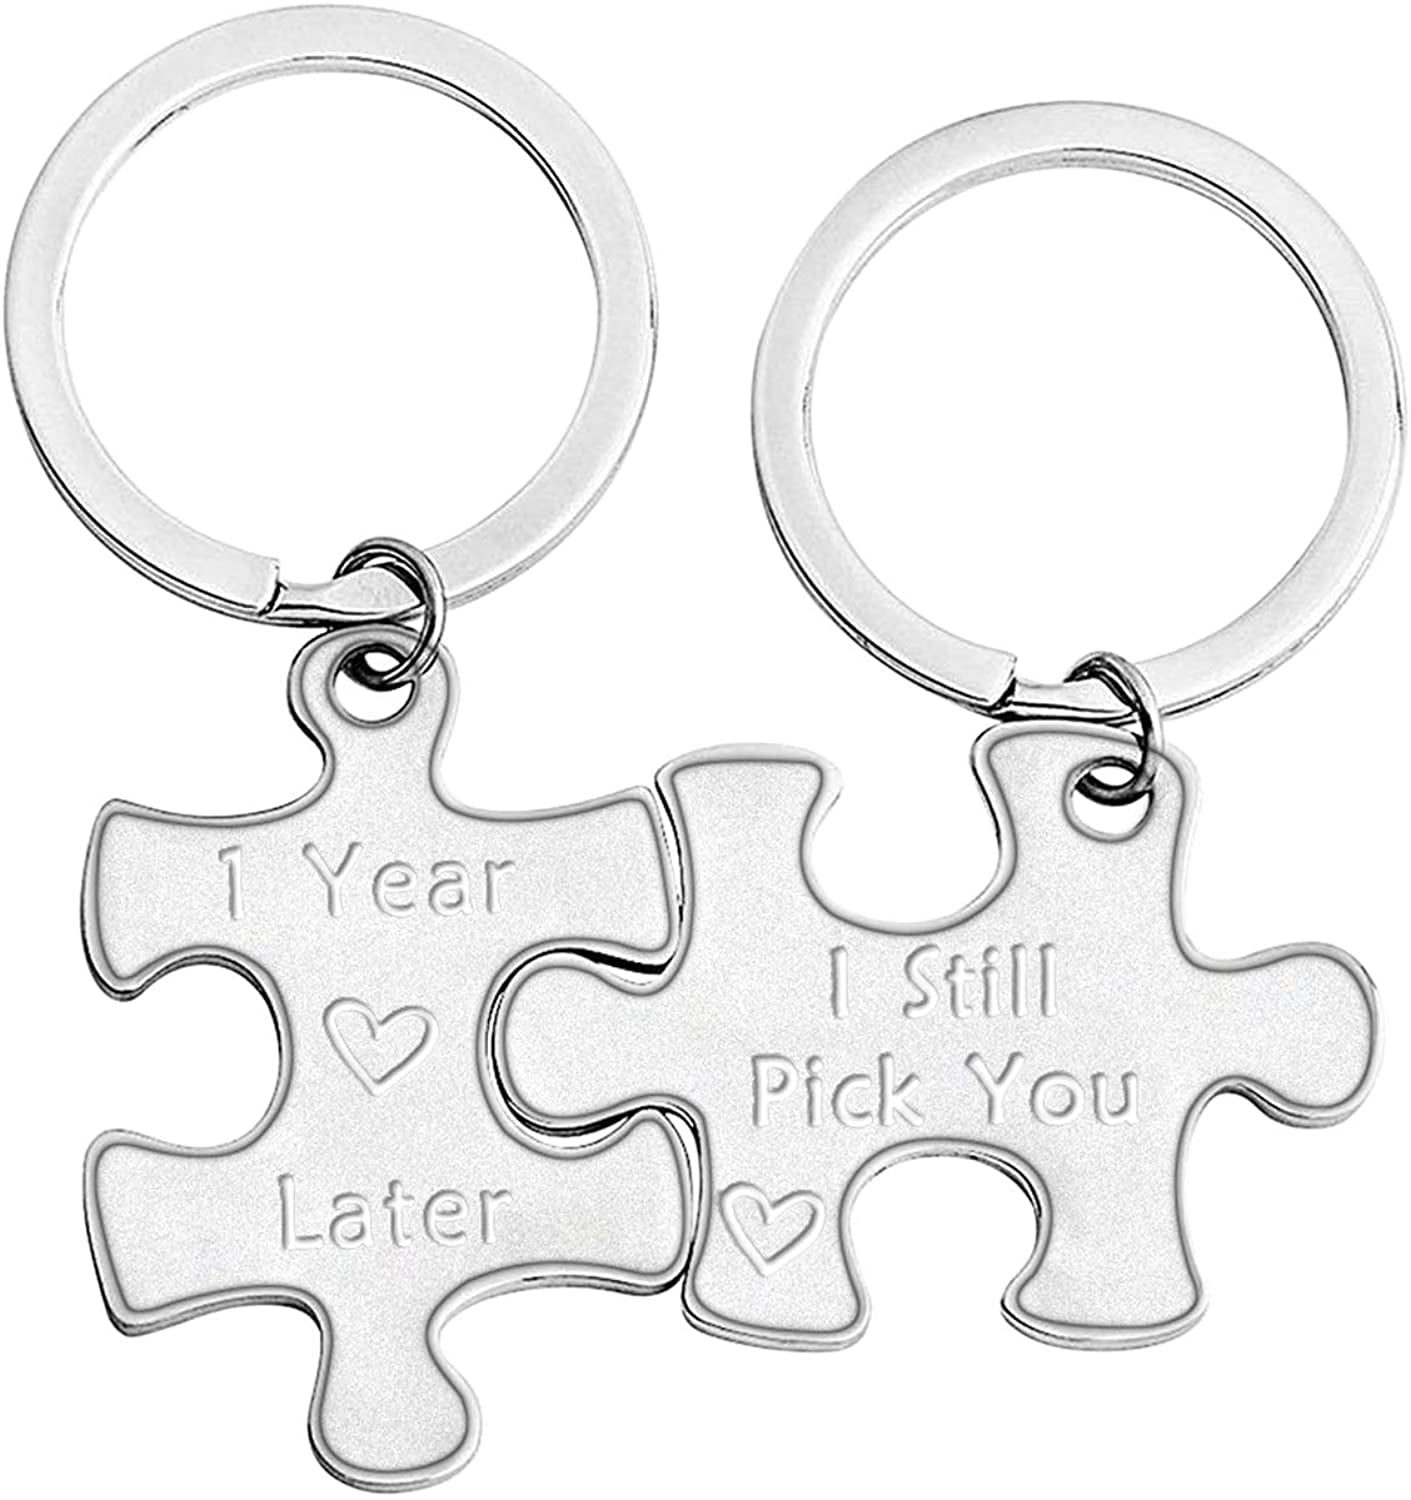 Zuo Bao 1,5,10,20 Years Later I Still Pick You Key Ring Stainless Steel Jigsaw Puzzle Piece Matching Pendant Keychain Set Couple Jewelry 1 Year Later K-Black